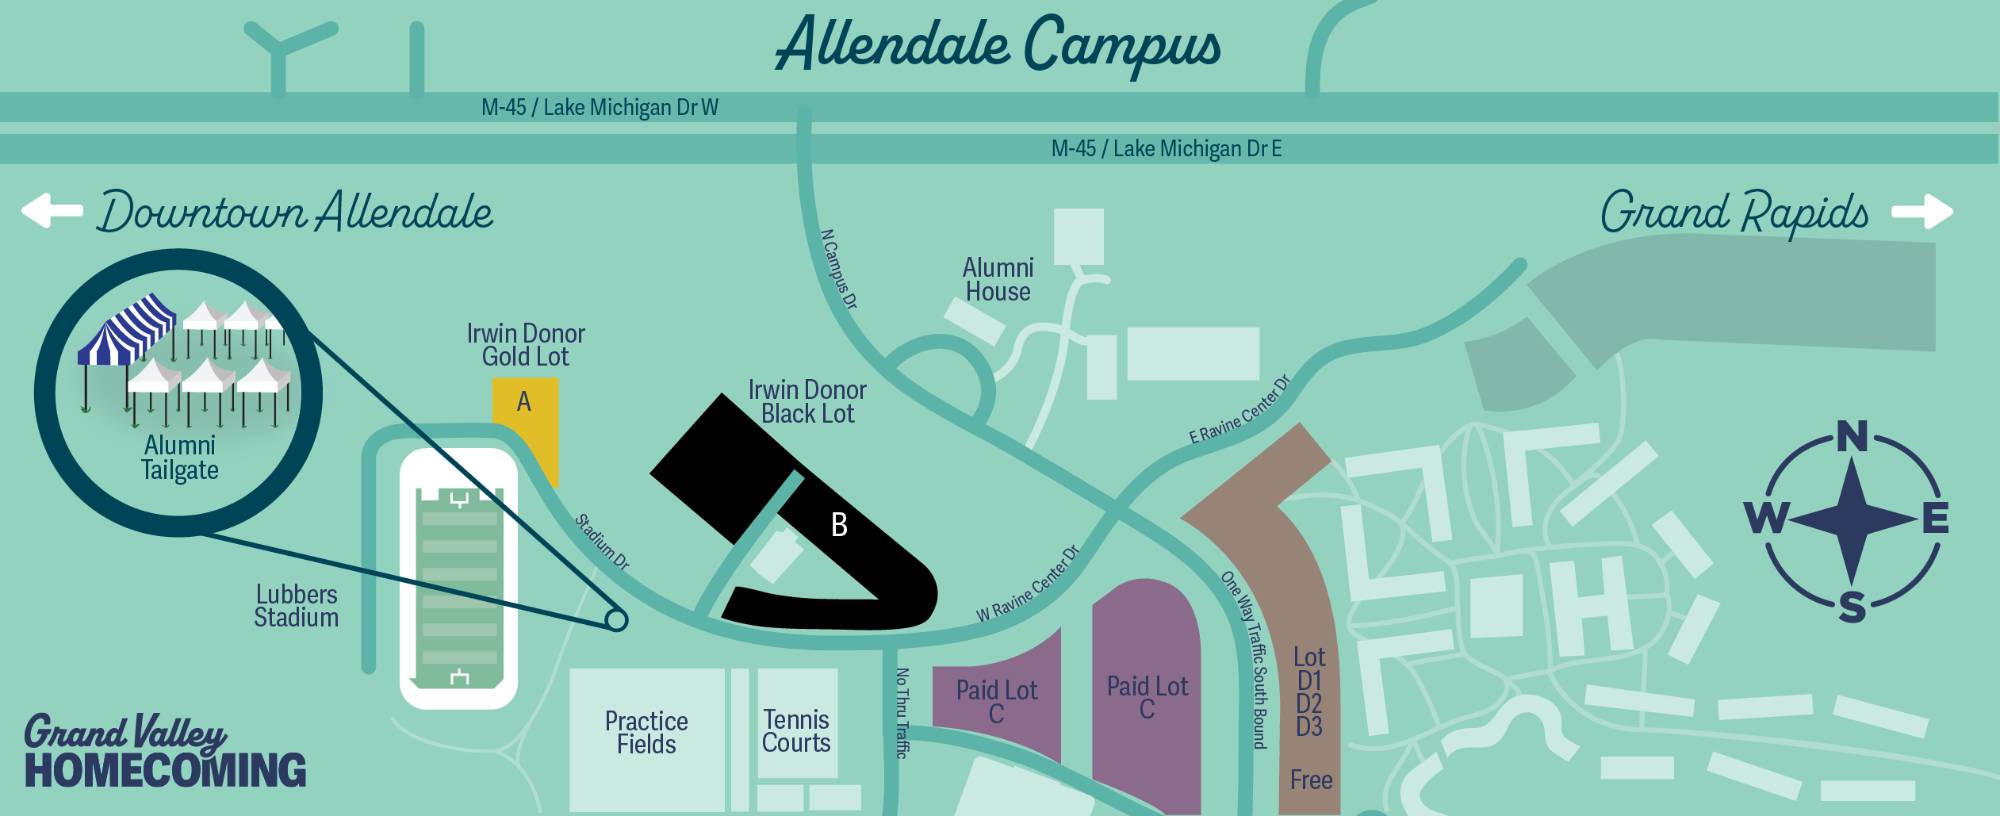 Allendale campus map showing the location of the Alumni Homecoming Tailgate next to Lubbers Stadium